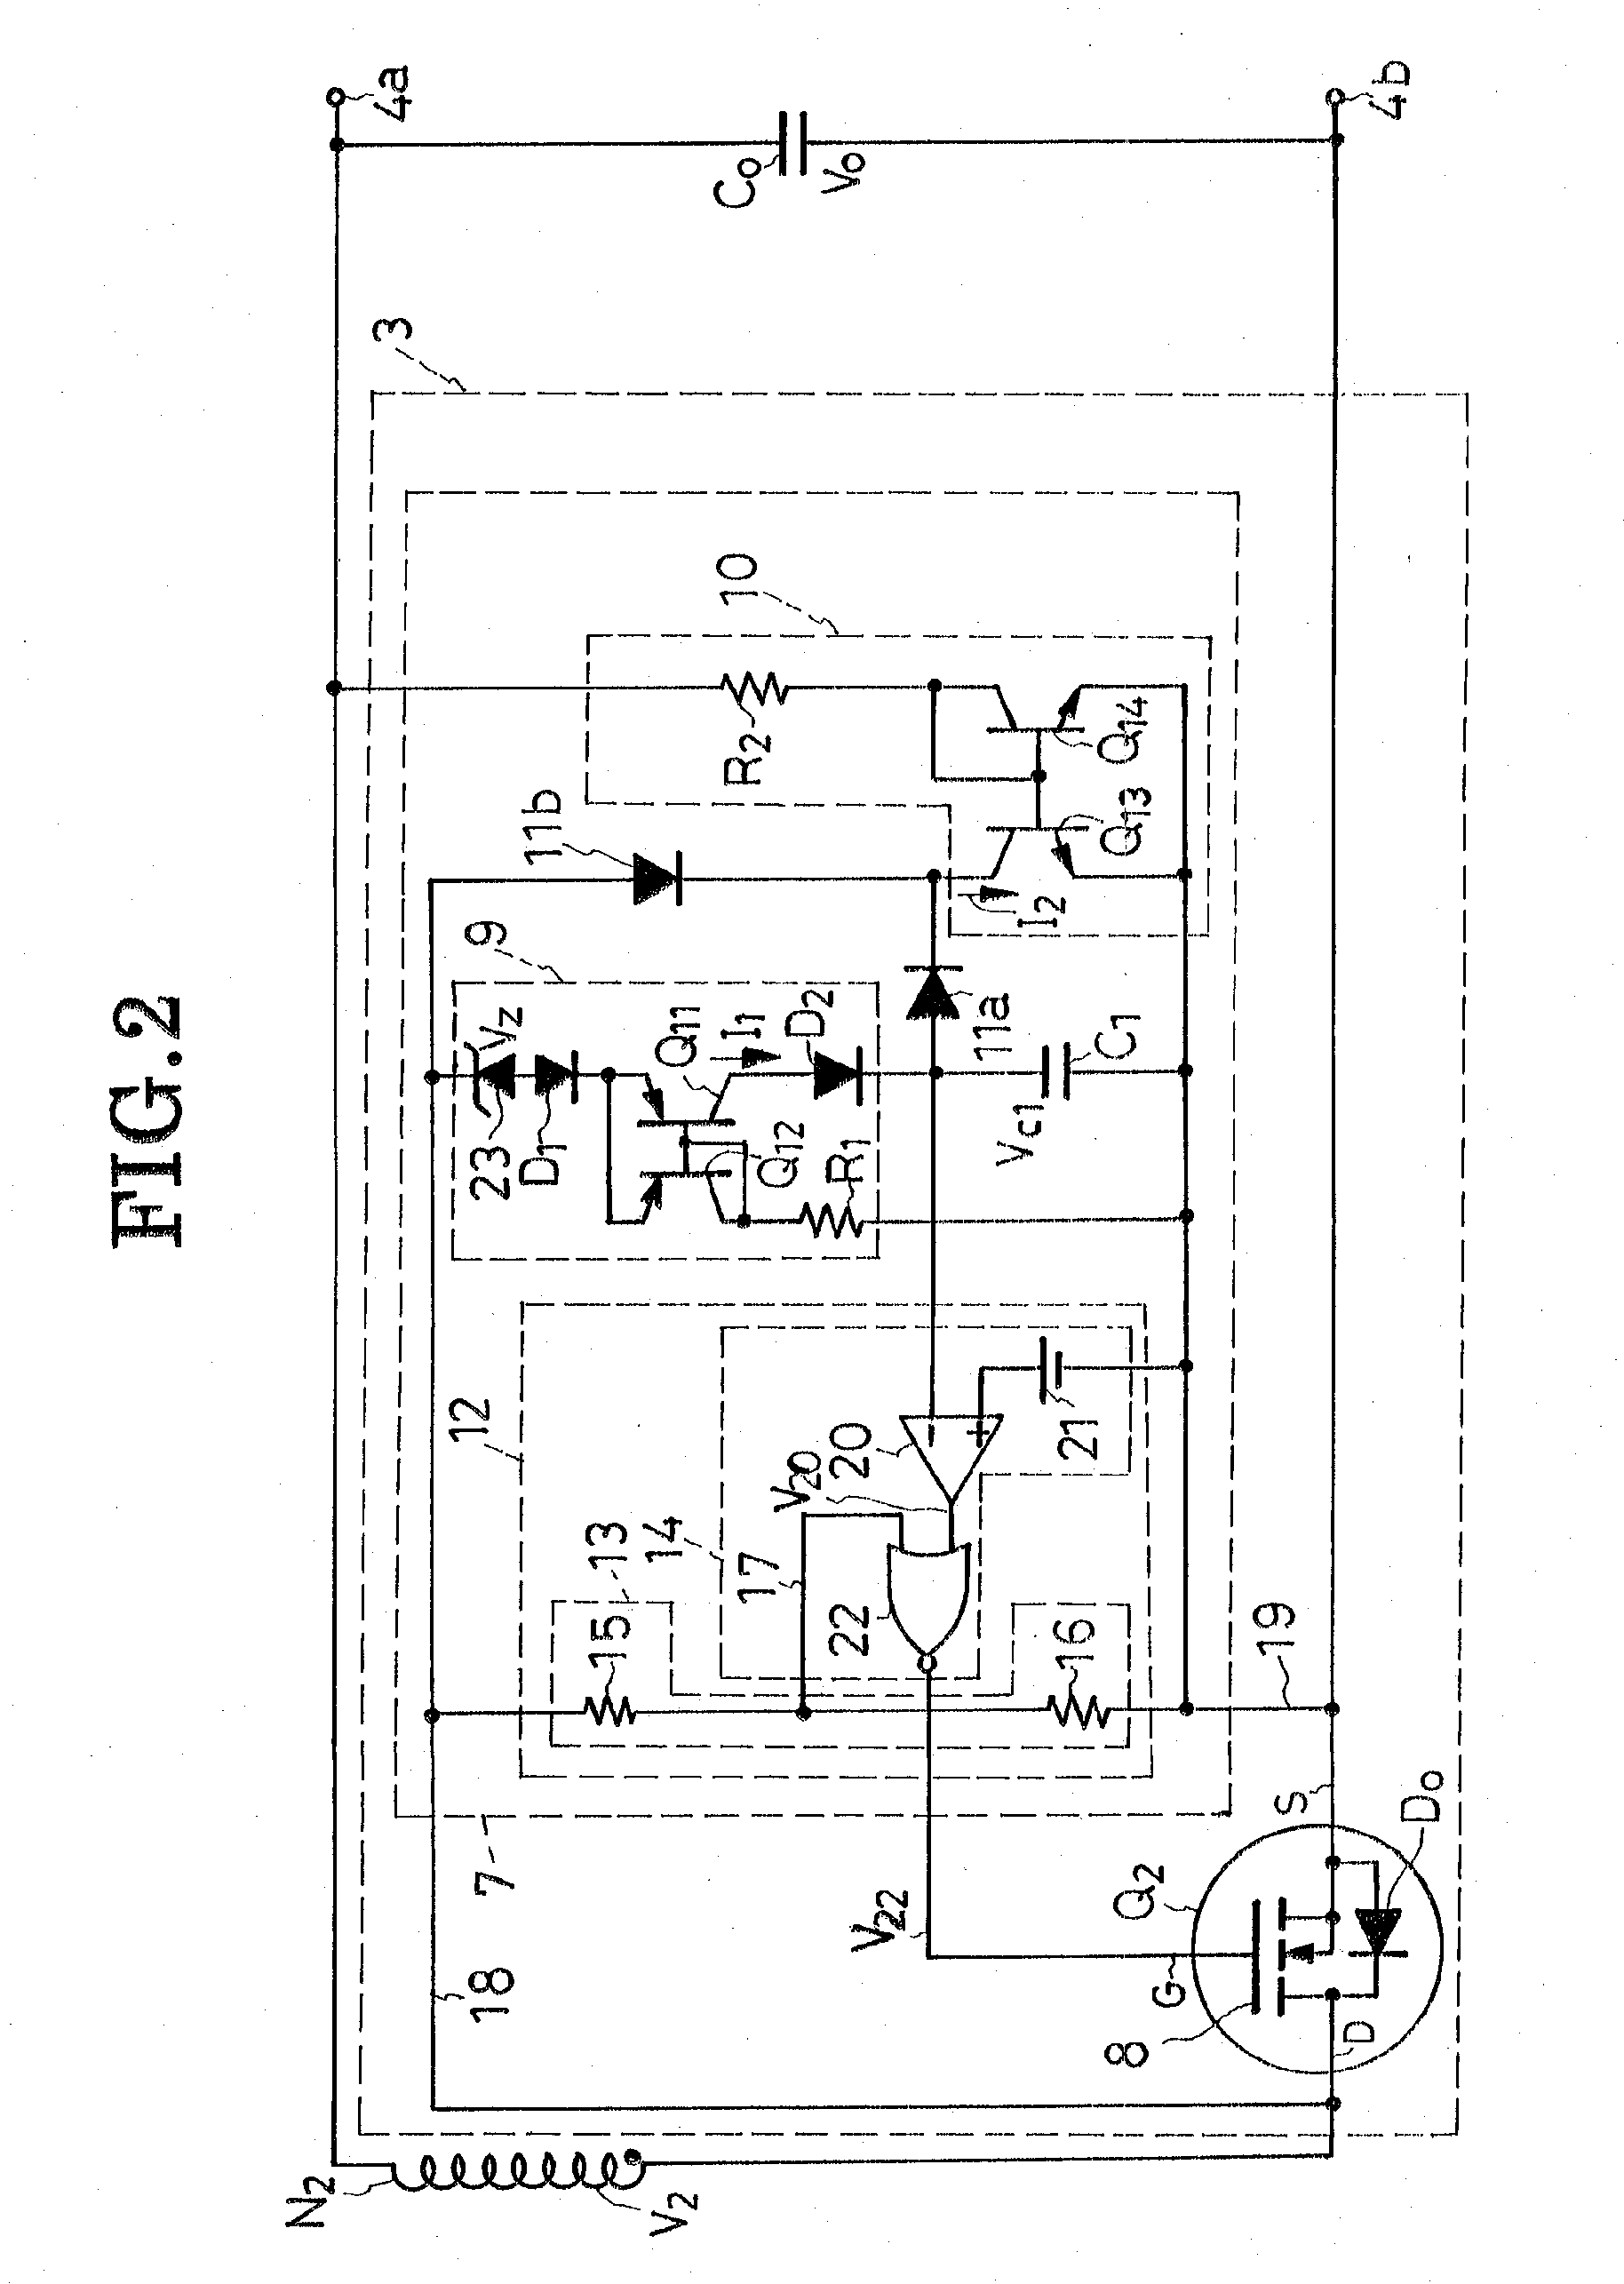 Switching-mode power supply having a synchronous rectifier